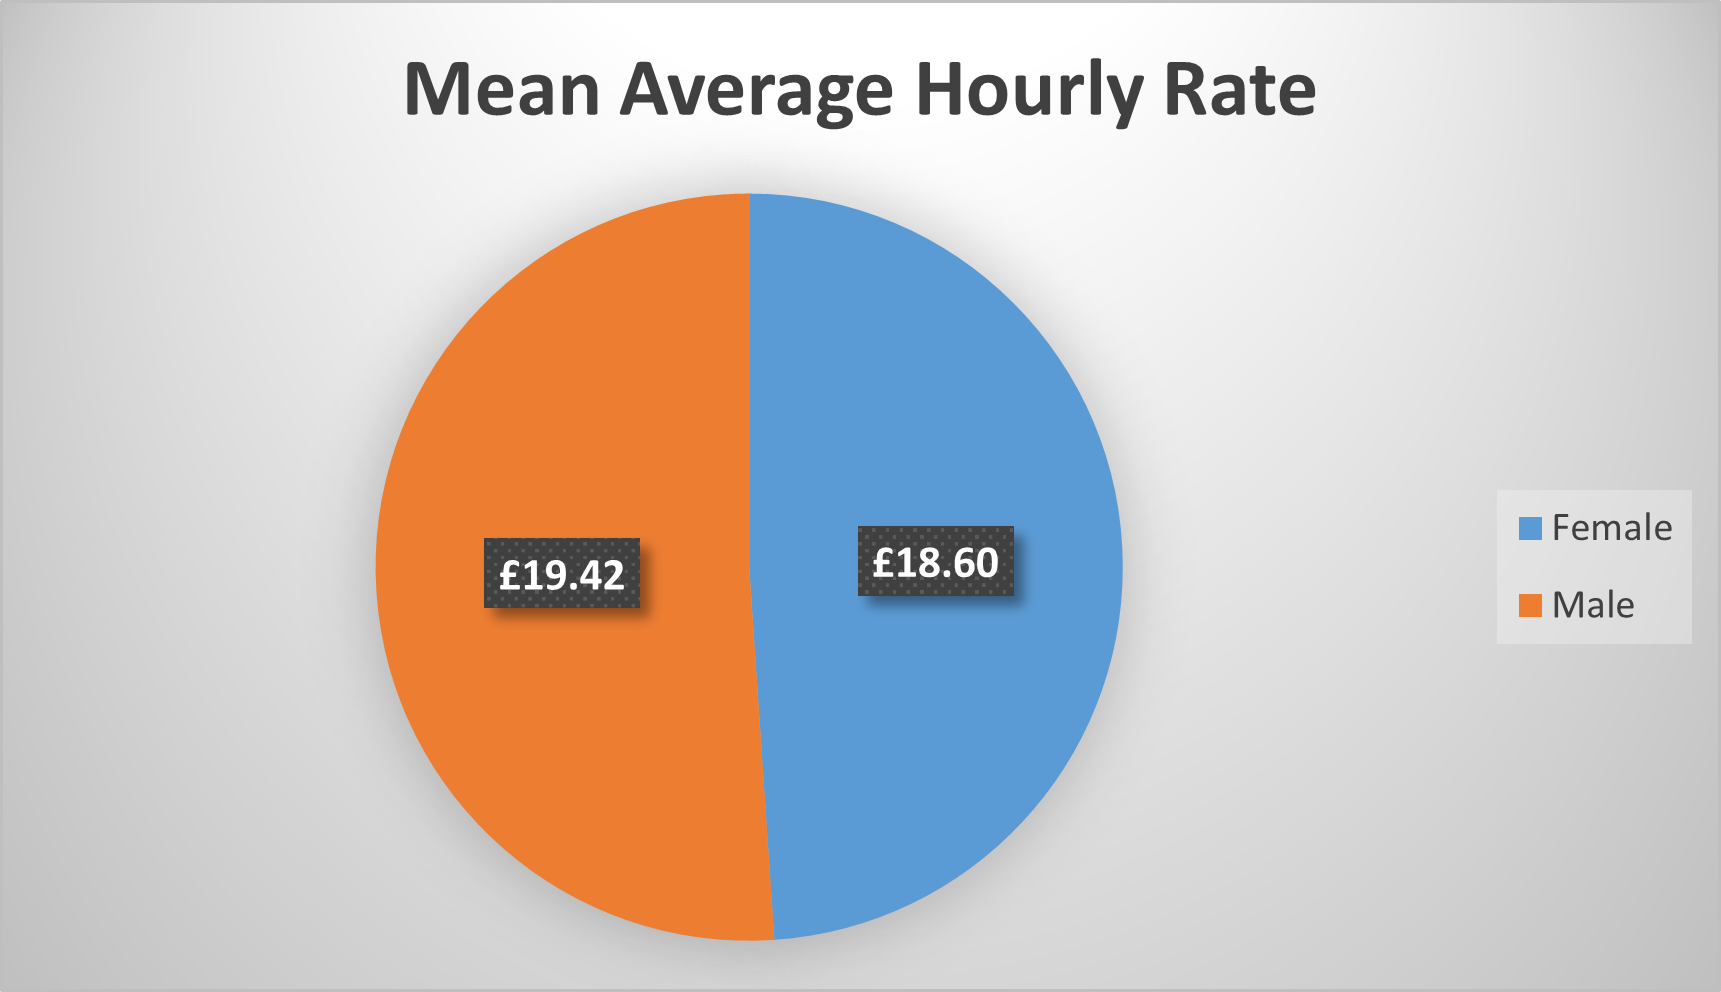 Mean average hourly rate for men £19.42 and Female £18.60